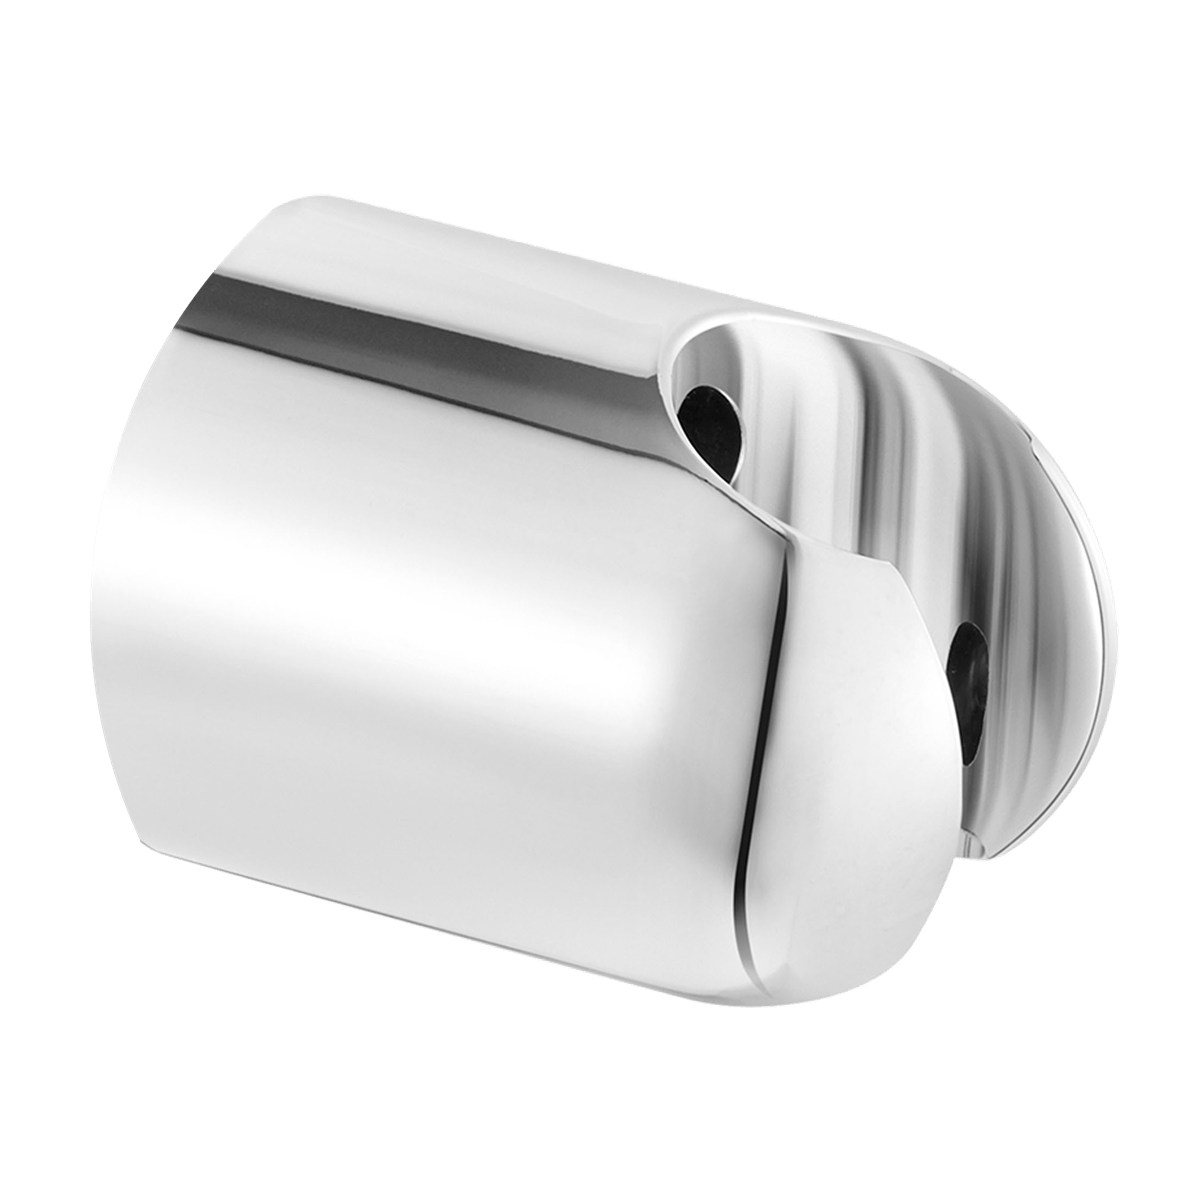 AMERICAN STANDARD 8888.036 FIXED WALL BRACKET FOR USE WITH PERSONAL SHOWERS